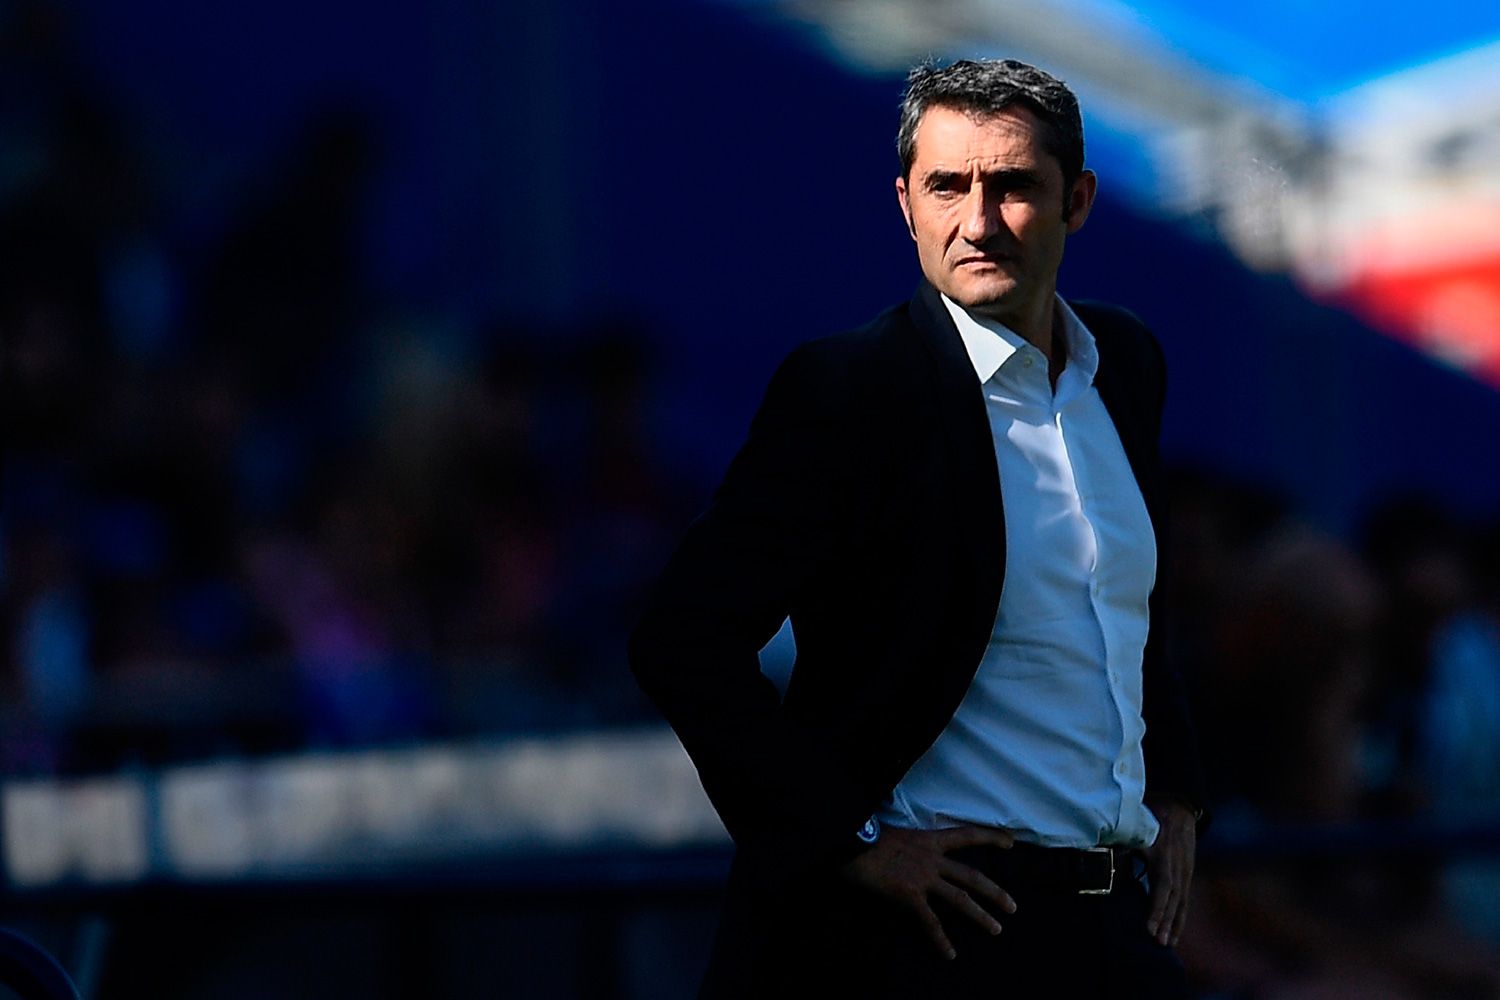 Valverde During the party against the Getafe